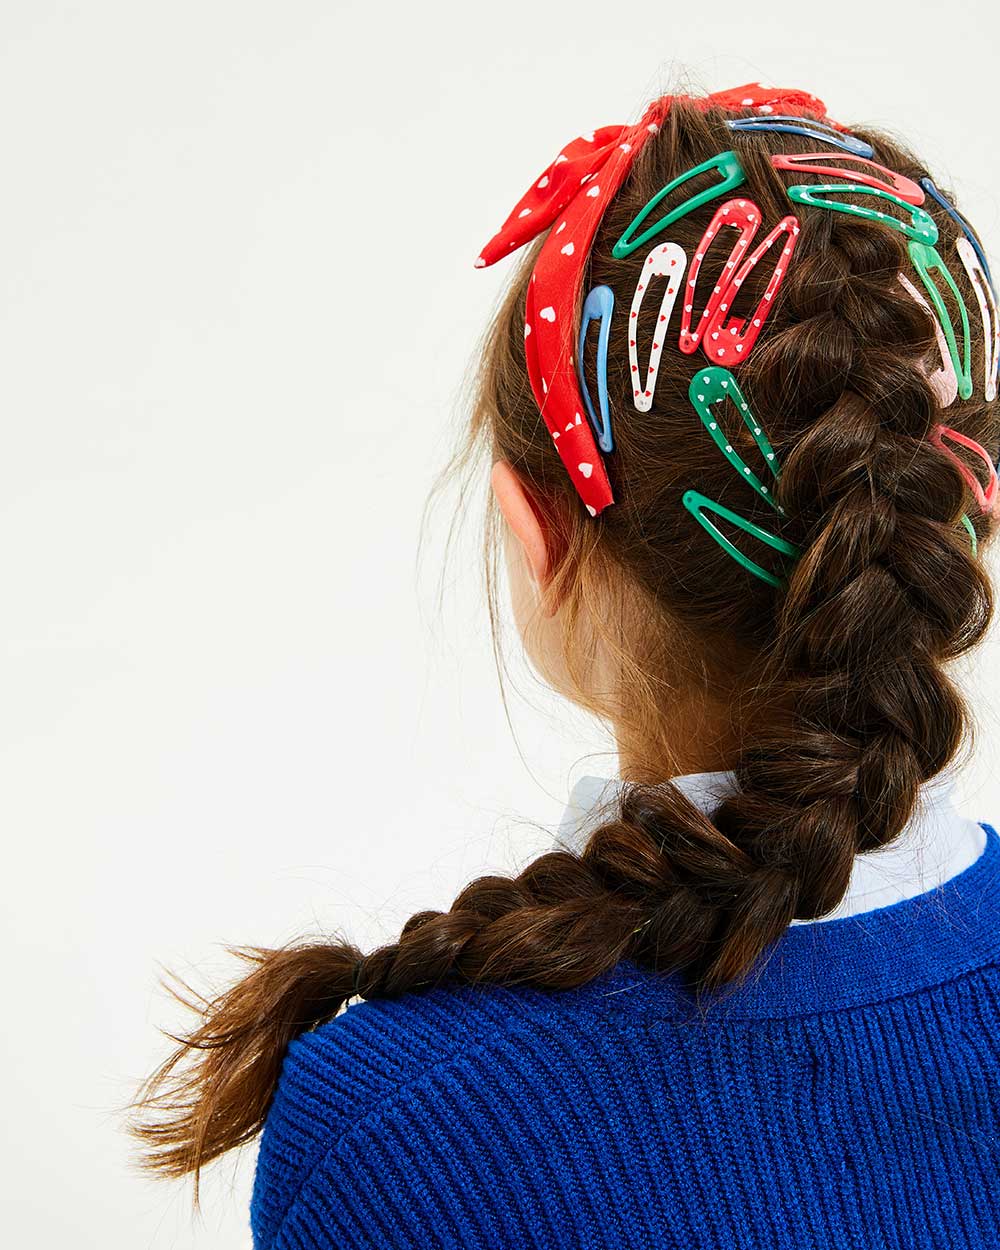 A young girl in a blue jumper wearing accessories in her hair